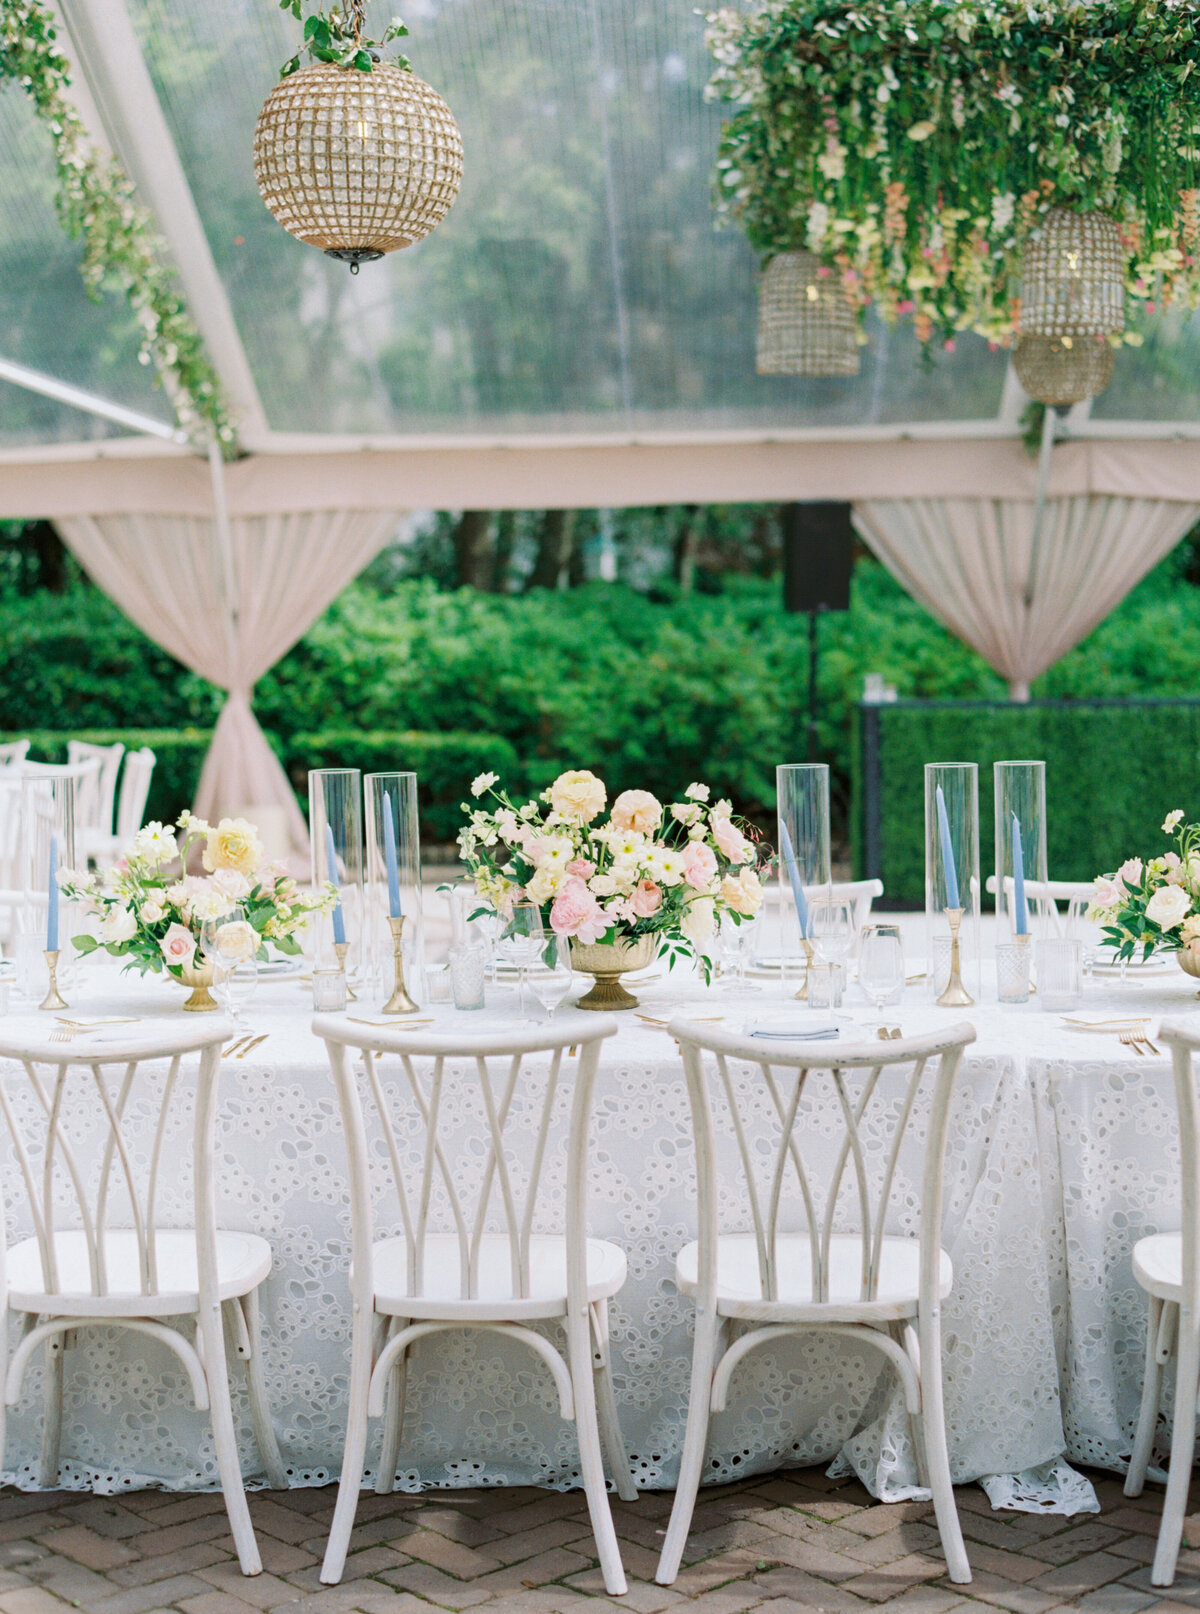 White chairs and table linens. Pale pink and yellow flowers with white and green. Charleston spring wedding.